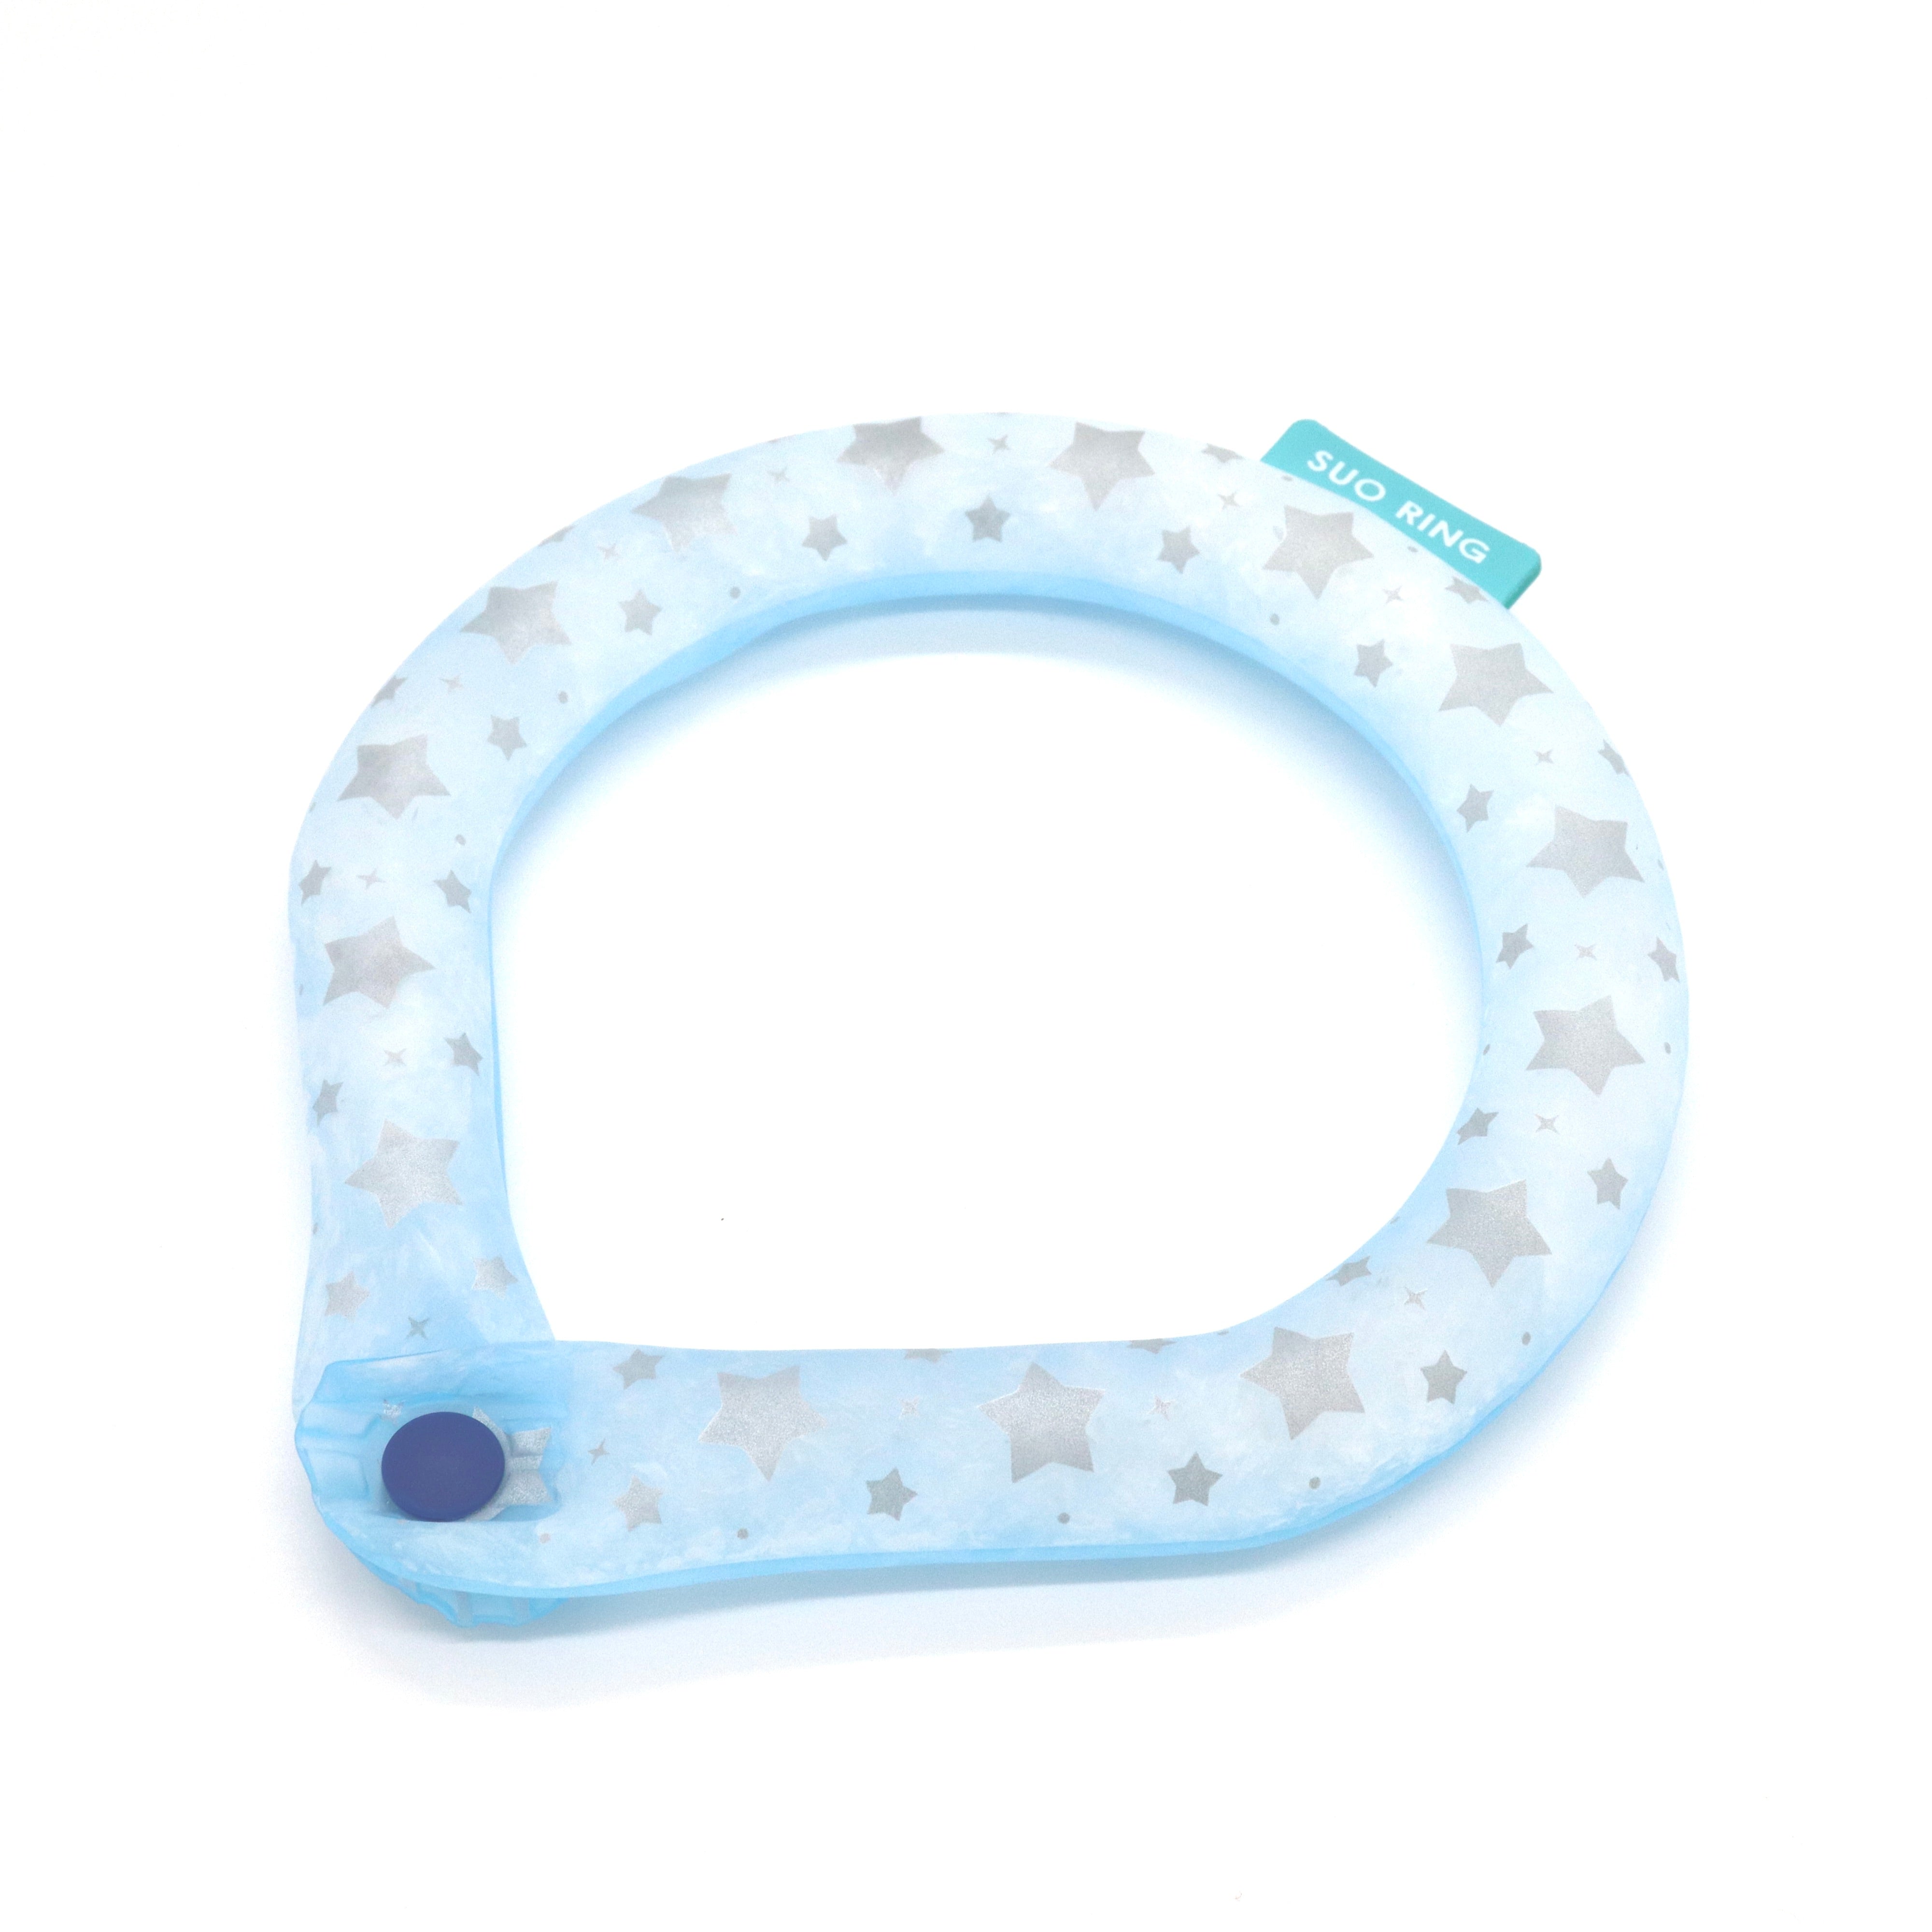 SUO RING 28°ICE for dogs ボタン付